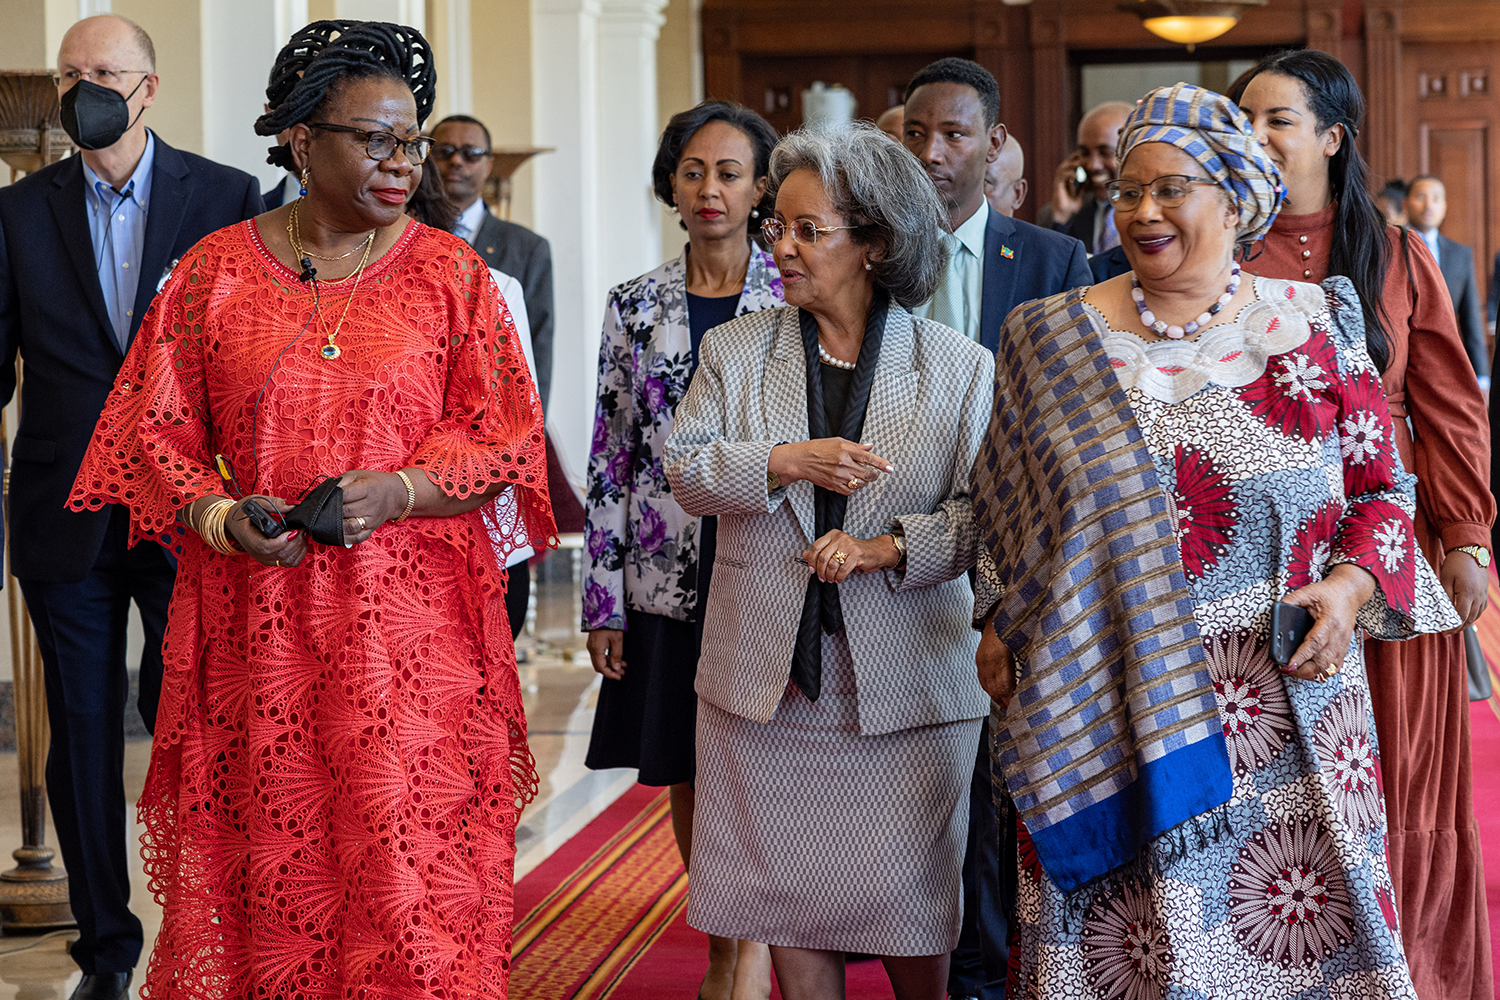 The Rt. Hon. Luisa Diogo, former Prime Minister of Mozambique, in the left of the picture and Her Excellency Joyce Banda, former President of Malawi, in the right of the picture welcome Ethiopian President, Her Excellency Sahle-Work Zewde, in the middle of the picture to the 2022 Roundtable meeting in Addis Ababa. The three women converse while walking down a corridor to the meeting, accompanied by a group of Ministers and security personnel.